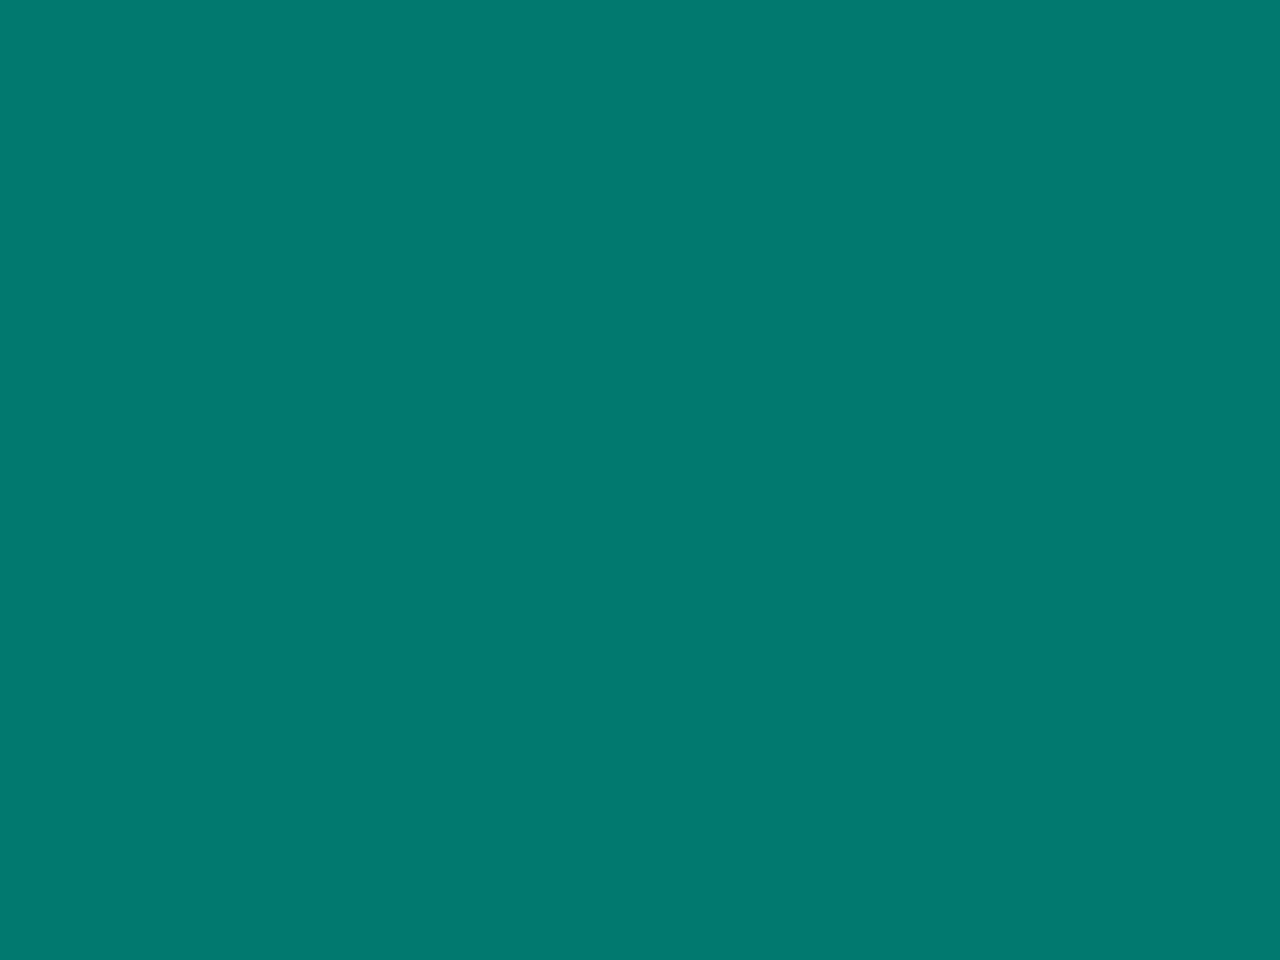 1280x960 Pine Green Solid Color Background